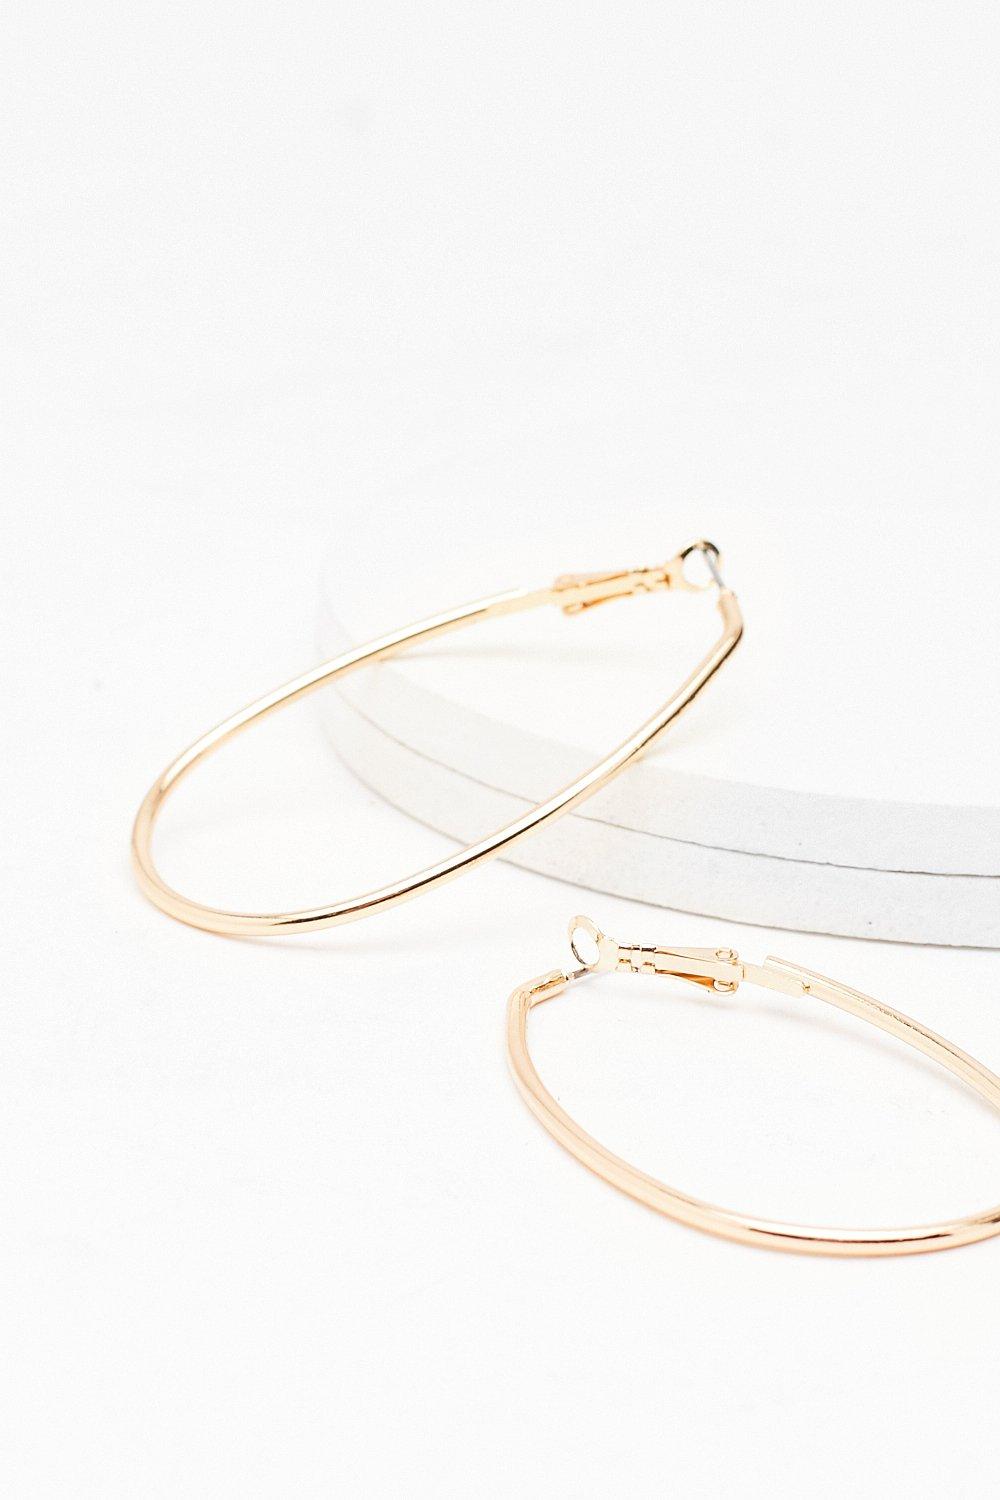 Amour Gold Hoops